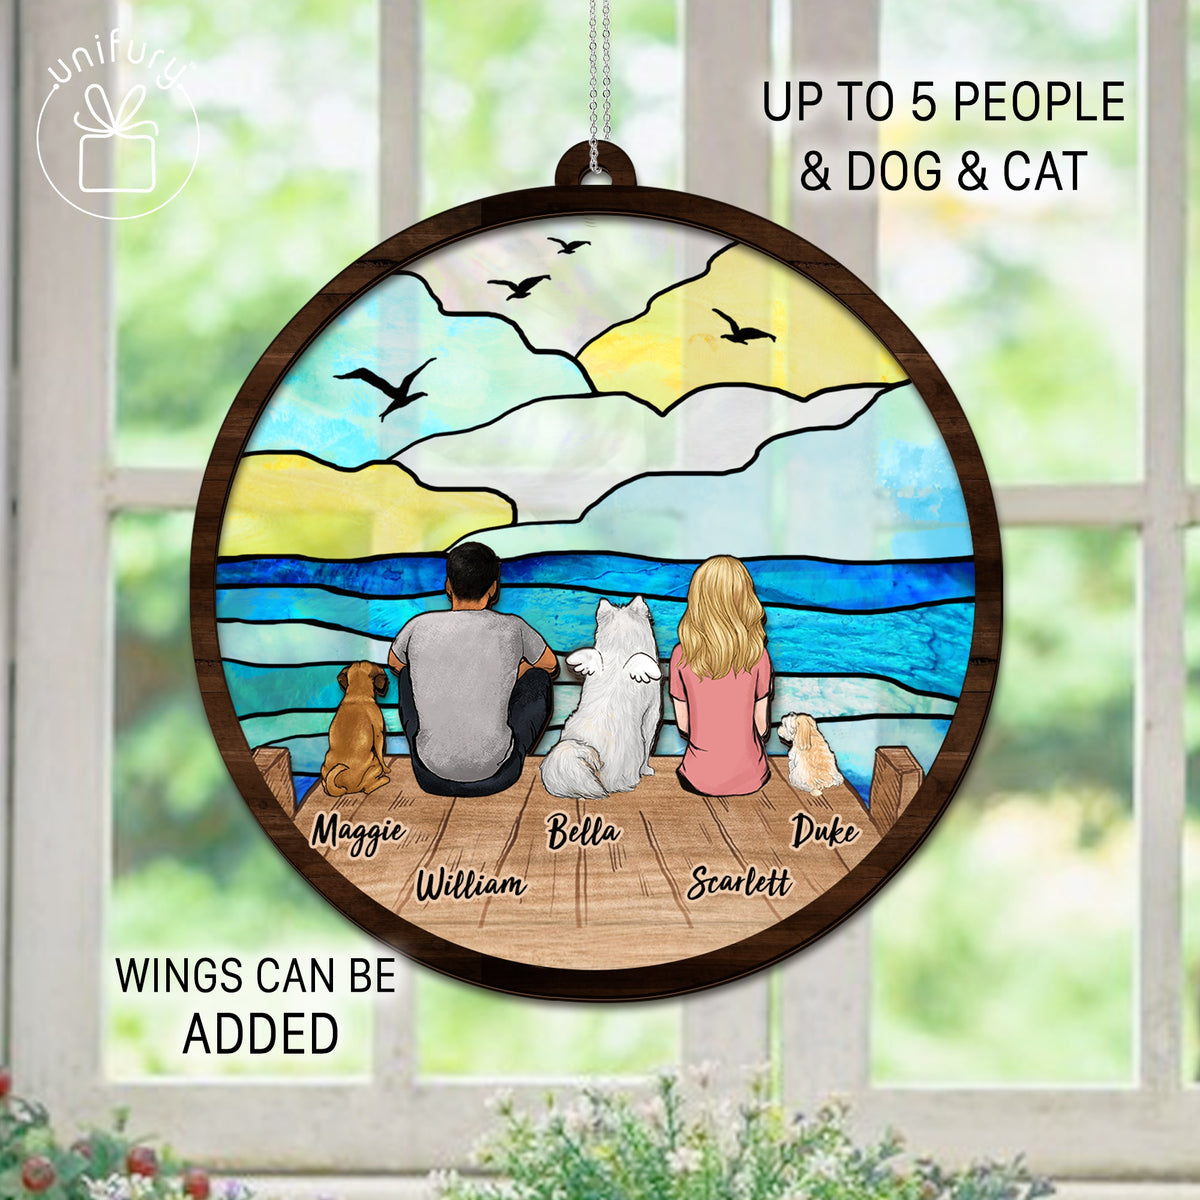 Wooden Dock Suncatcher Ornament Gifts, Personalized Christmas Gifts For Dog Cat Lovers